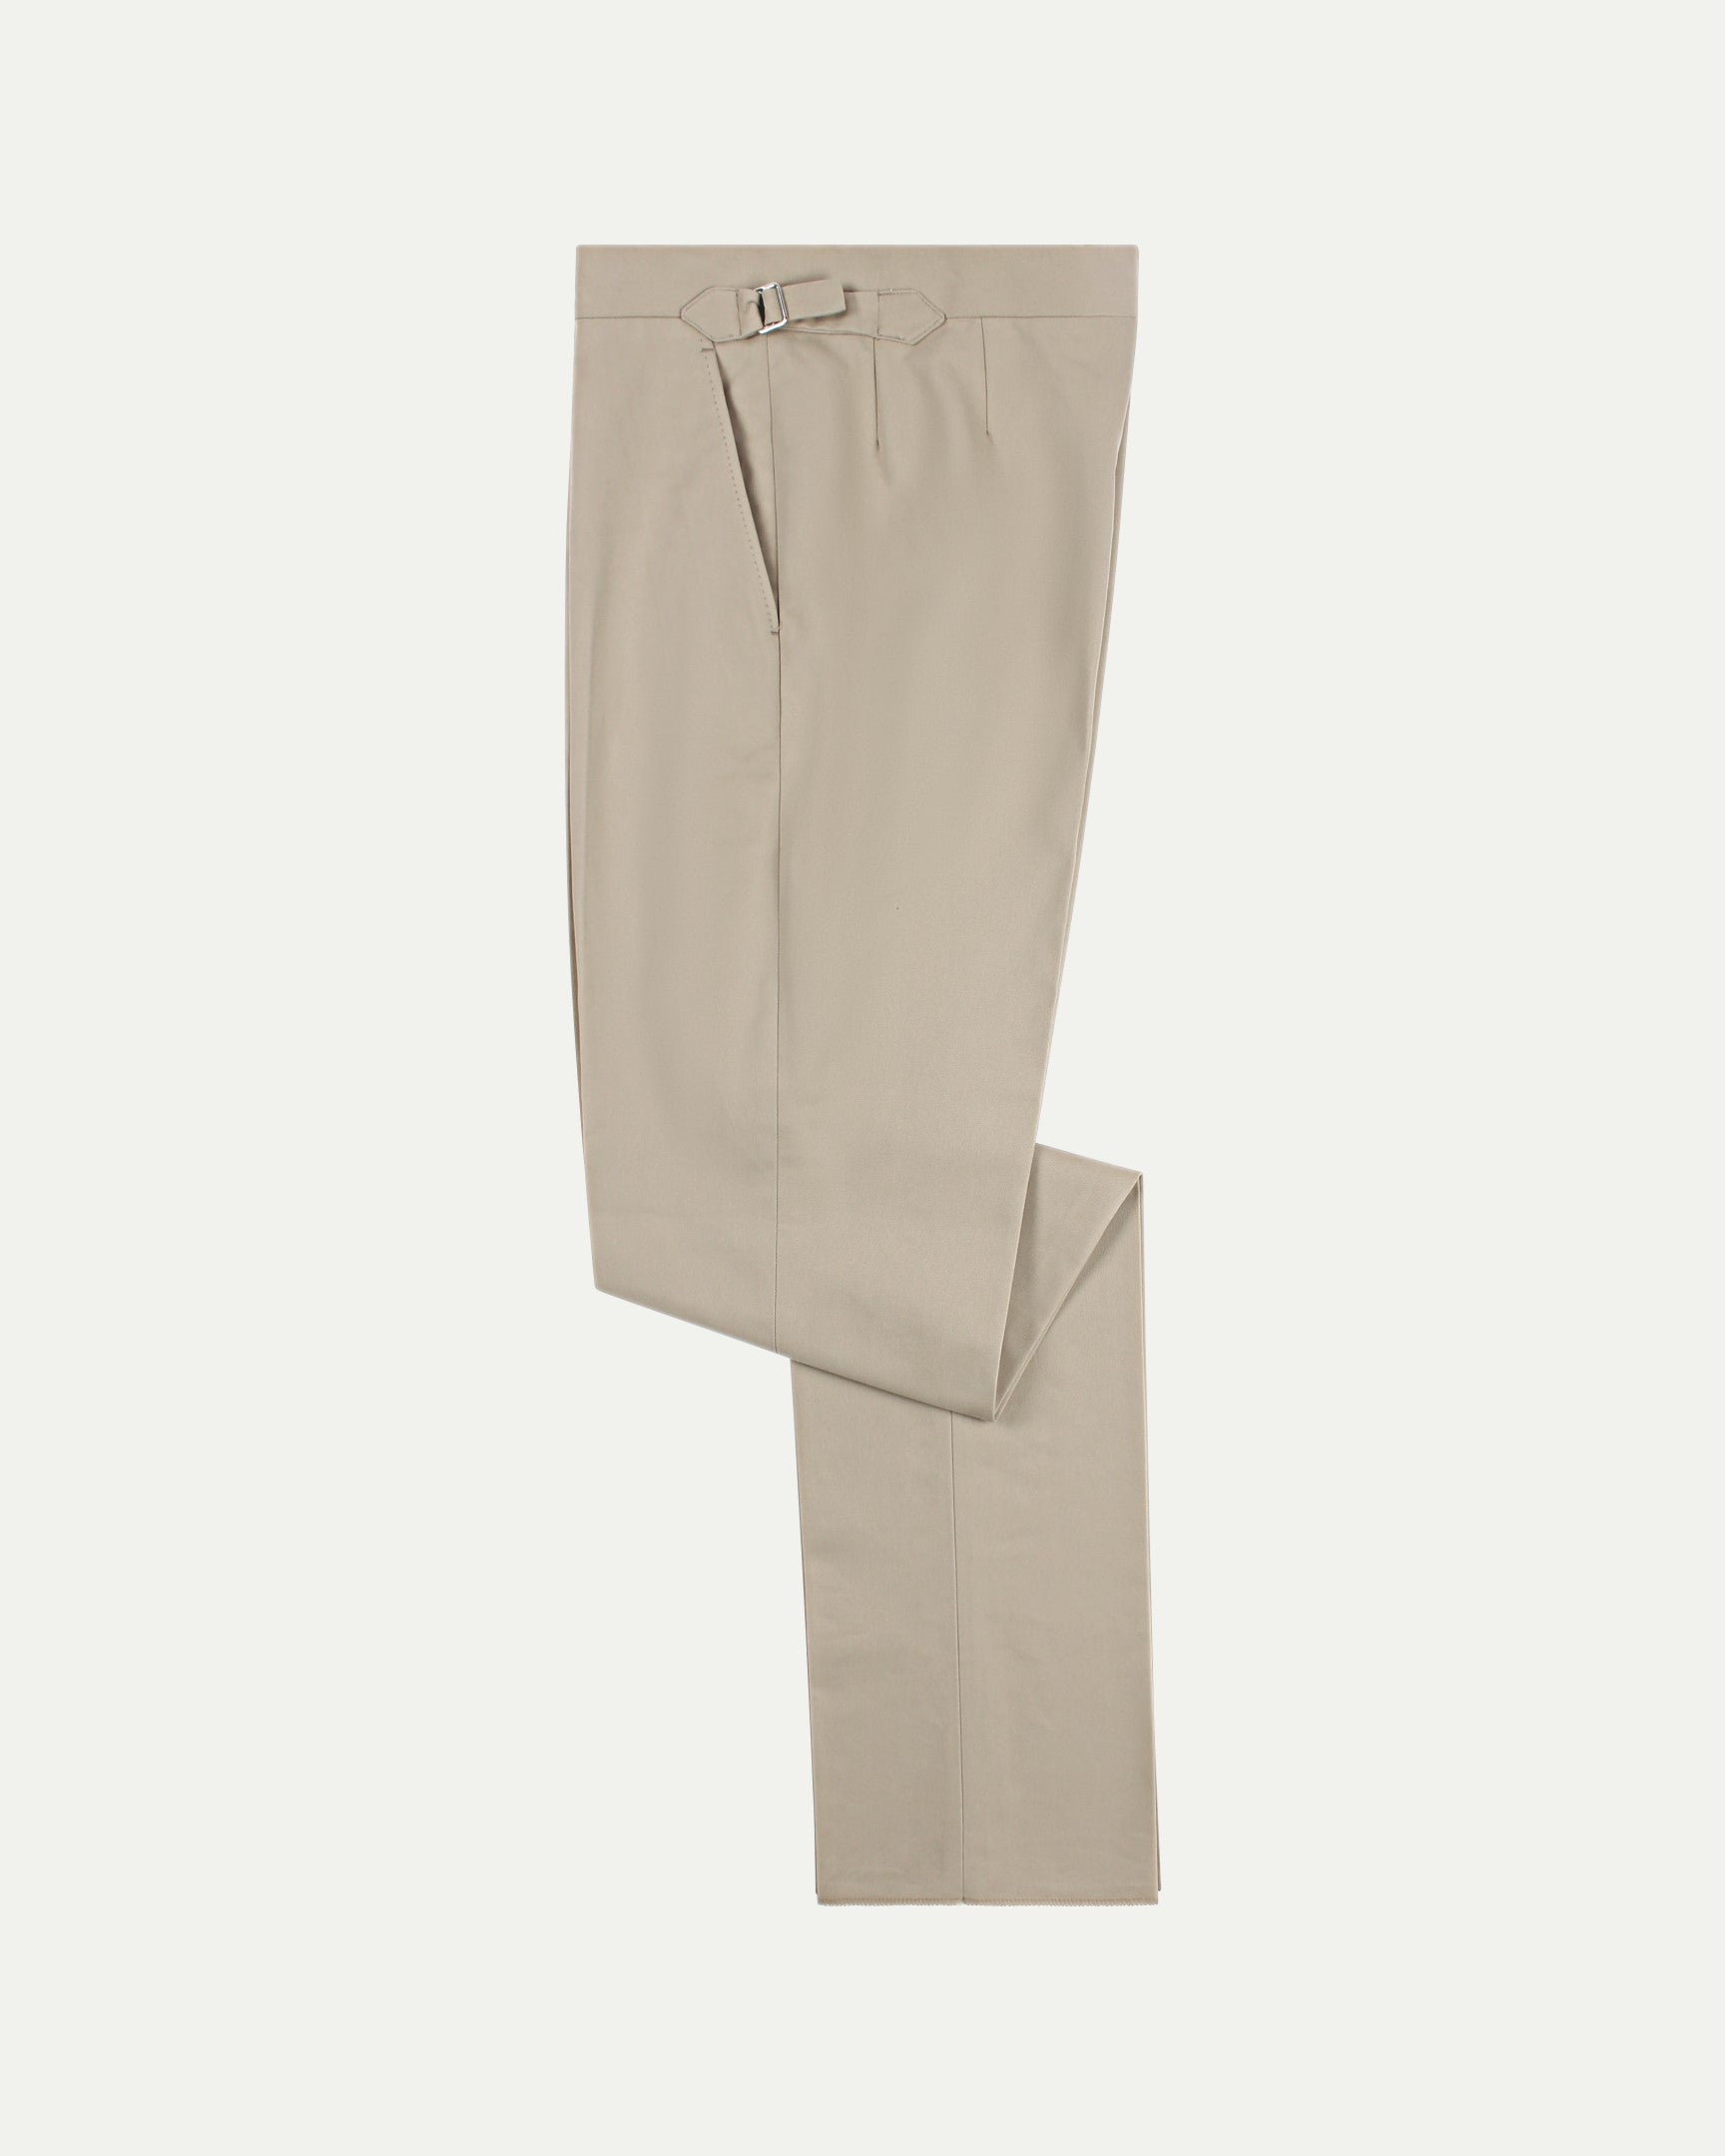 Made-To-Order Trousers in Stone Cotton Drill